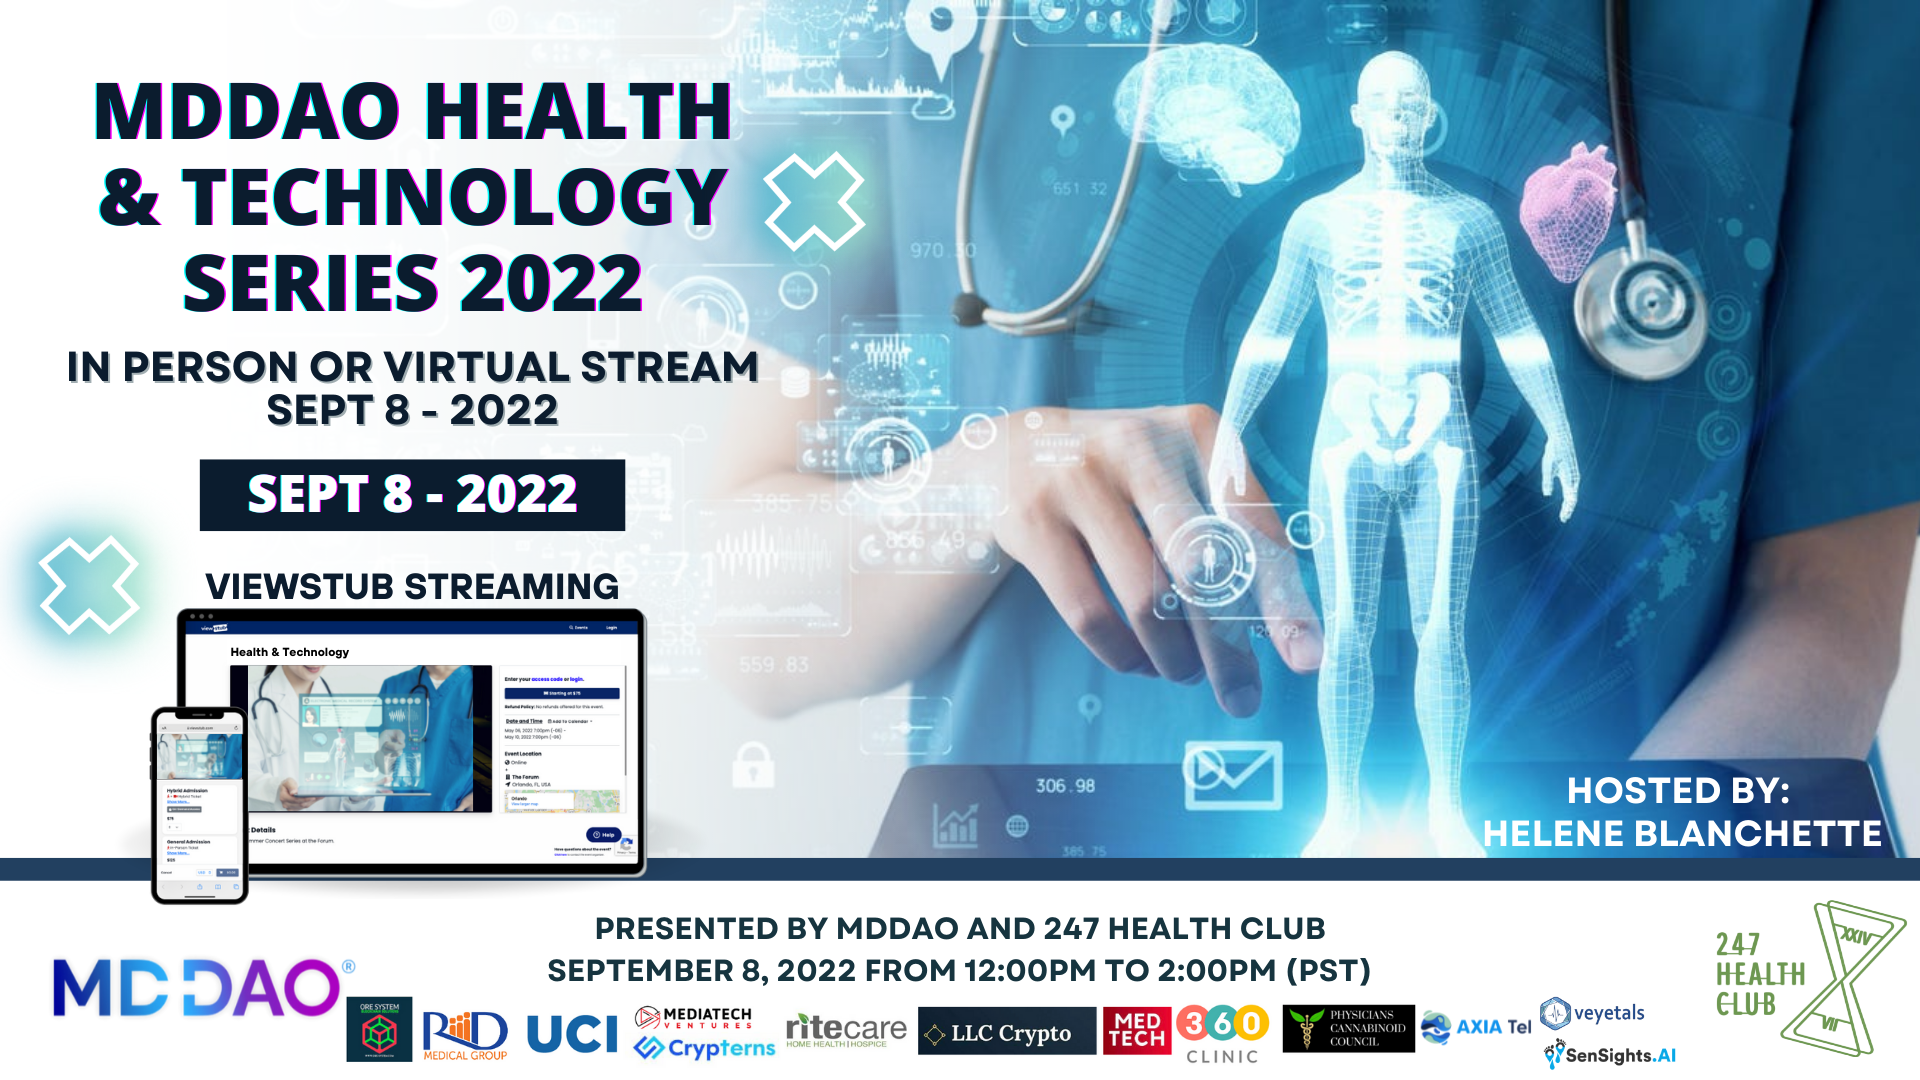 Photo for MDDAO Health & Technology Series 2022 on ViewStub